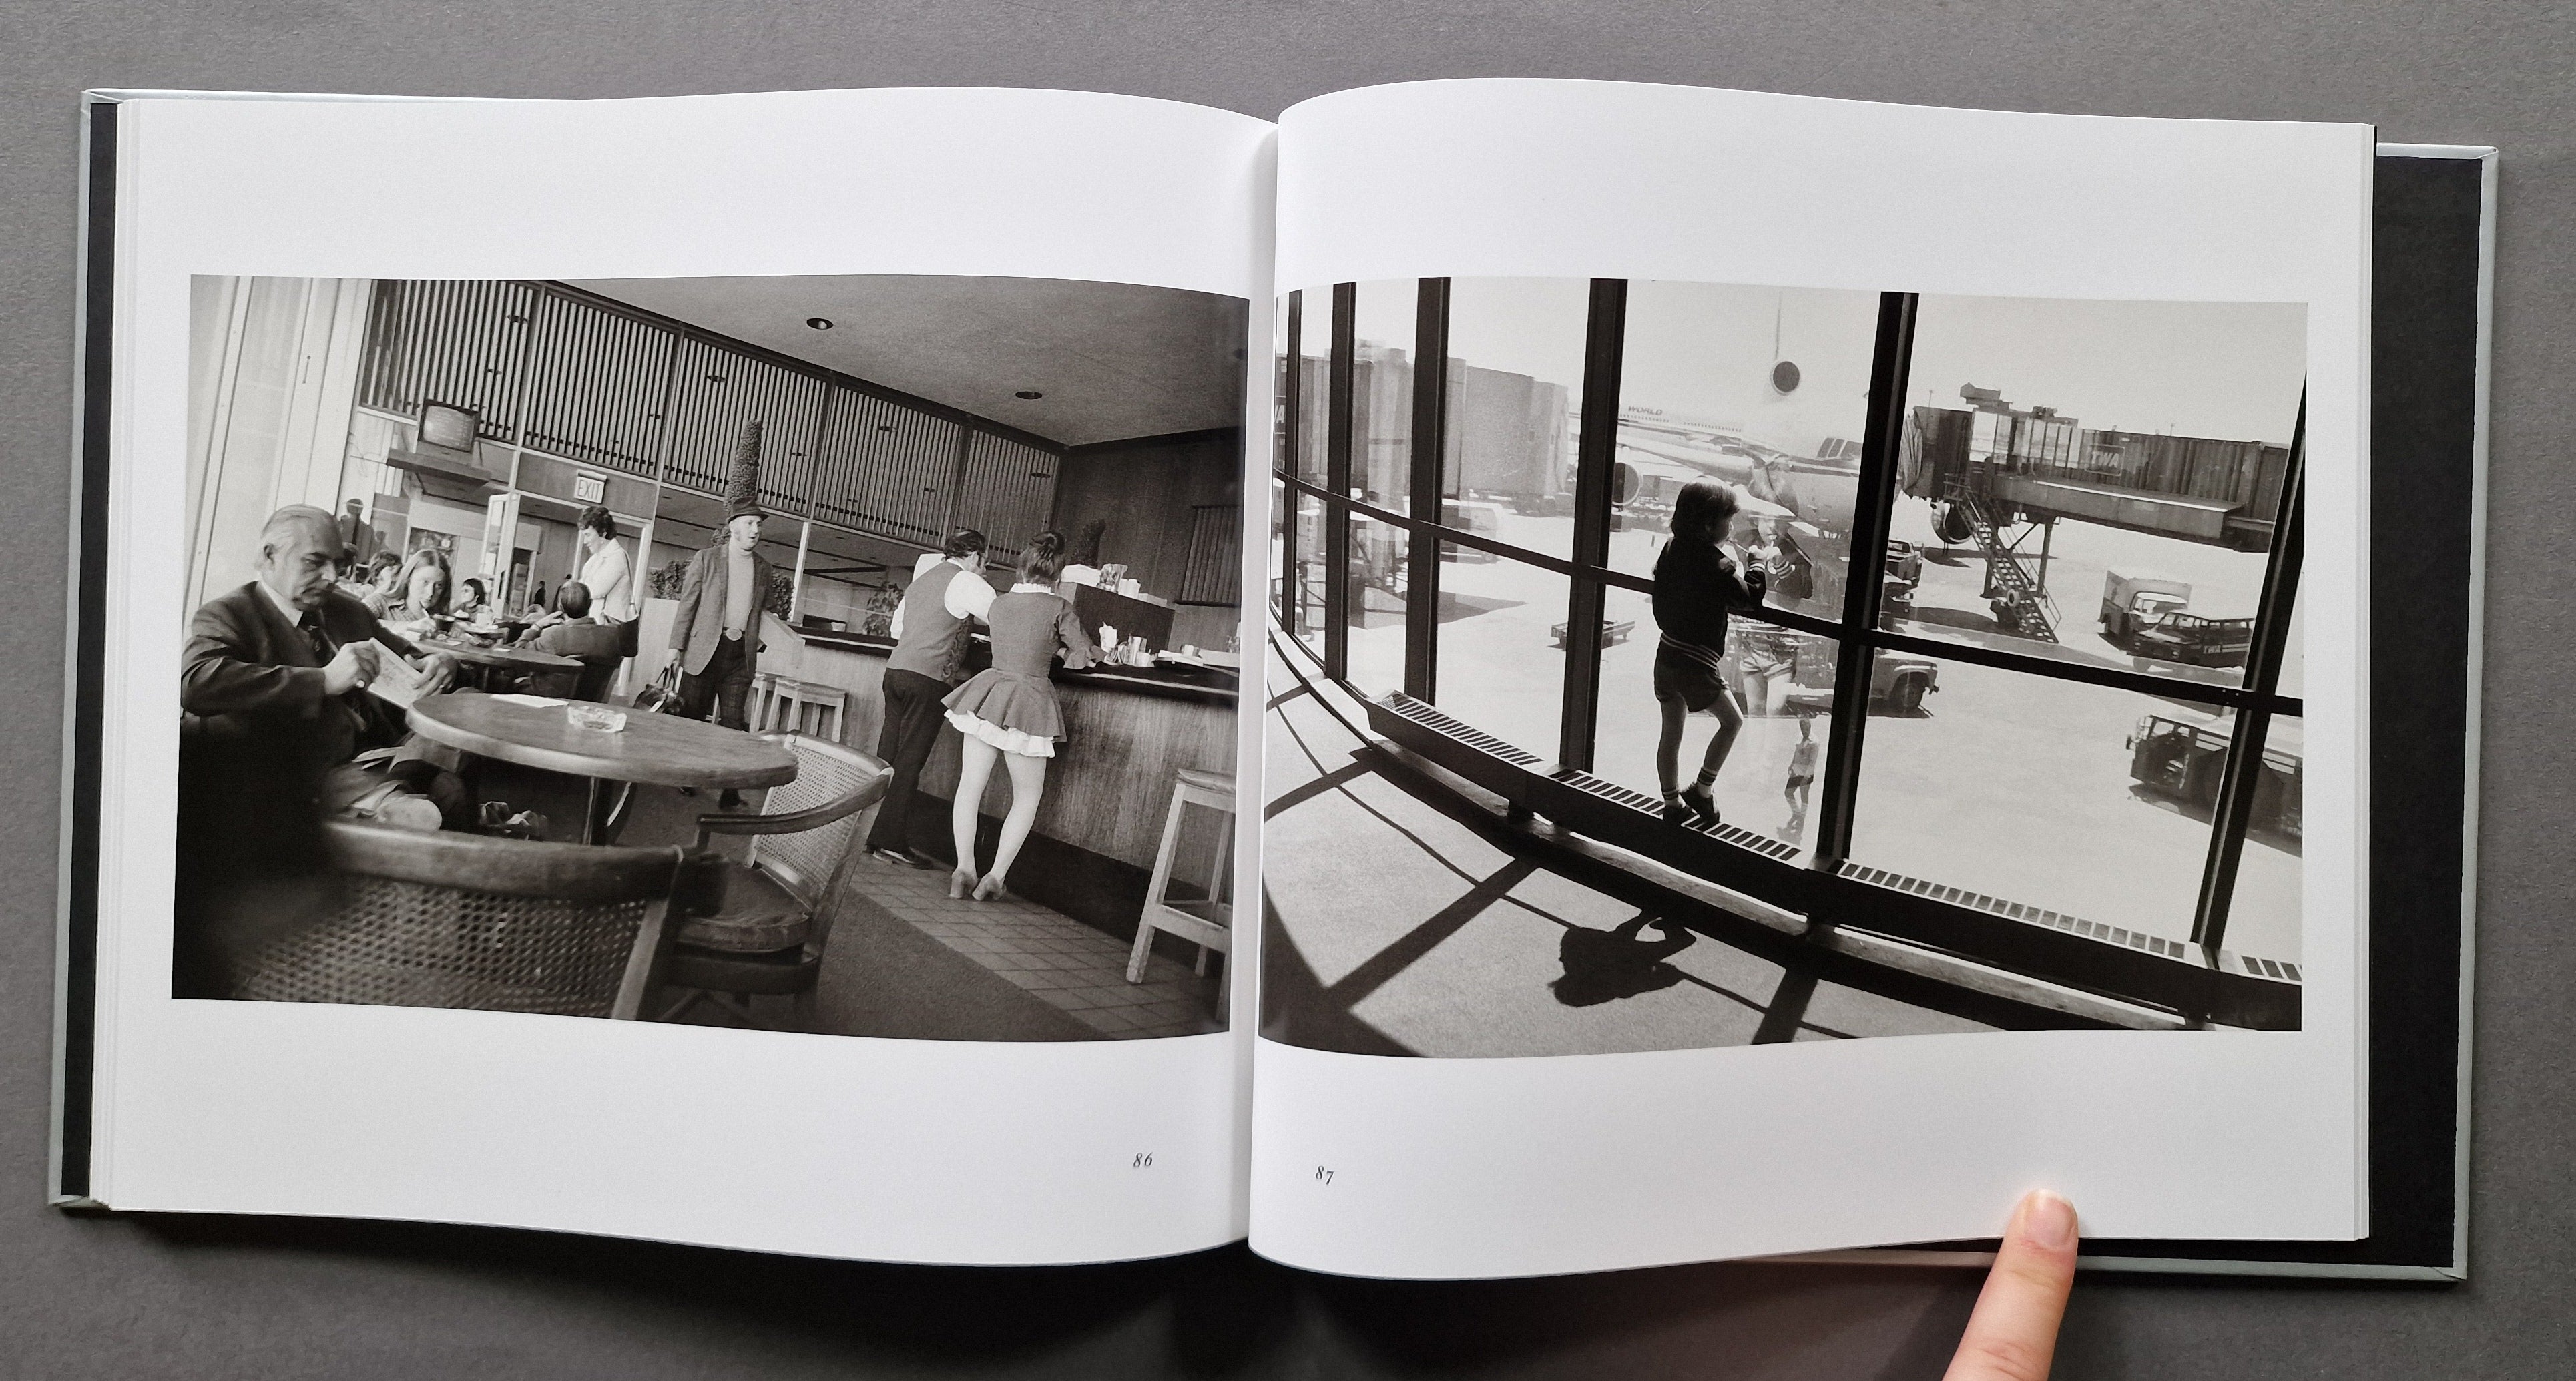 Buy Arrivals and Departures by Garry Winogrand – Setanta Books